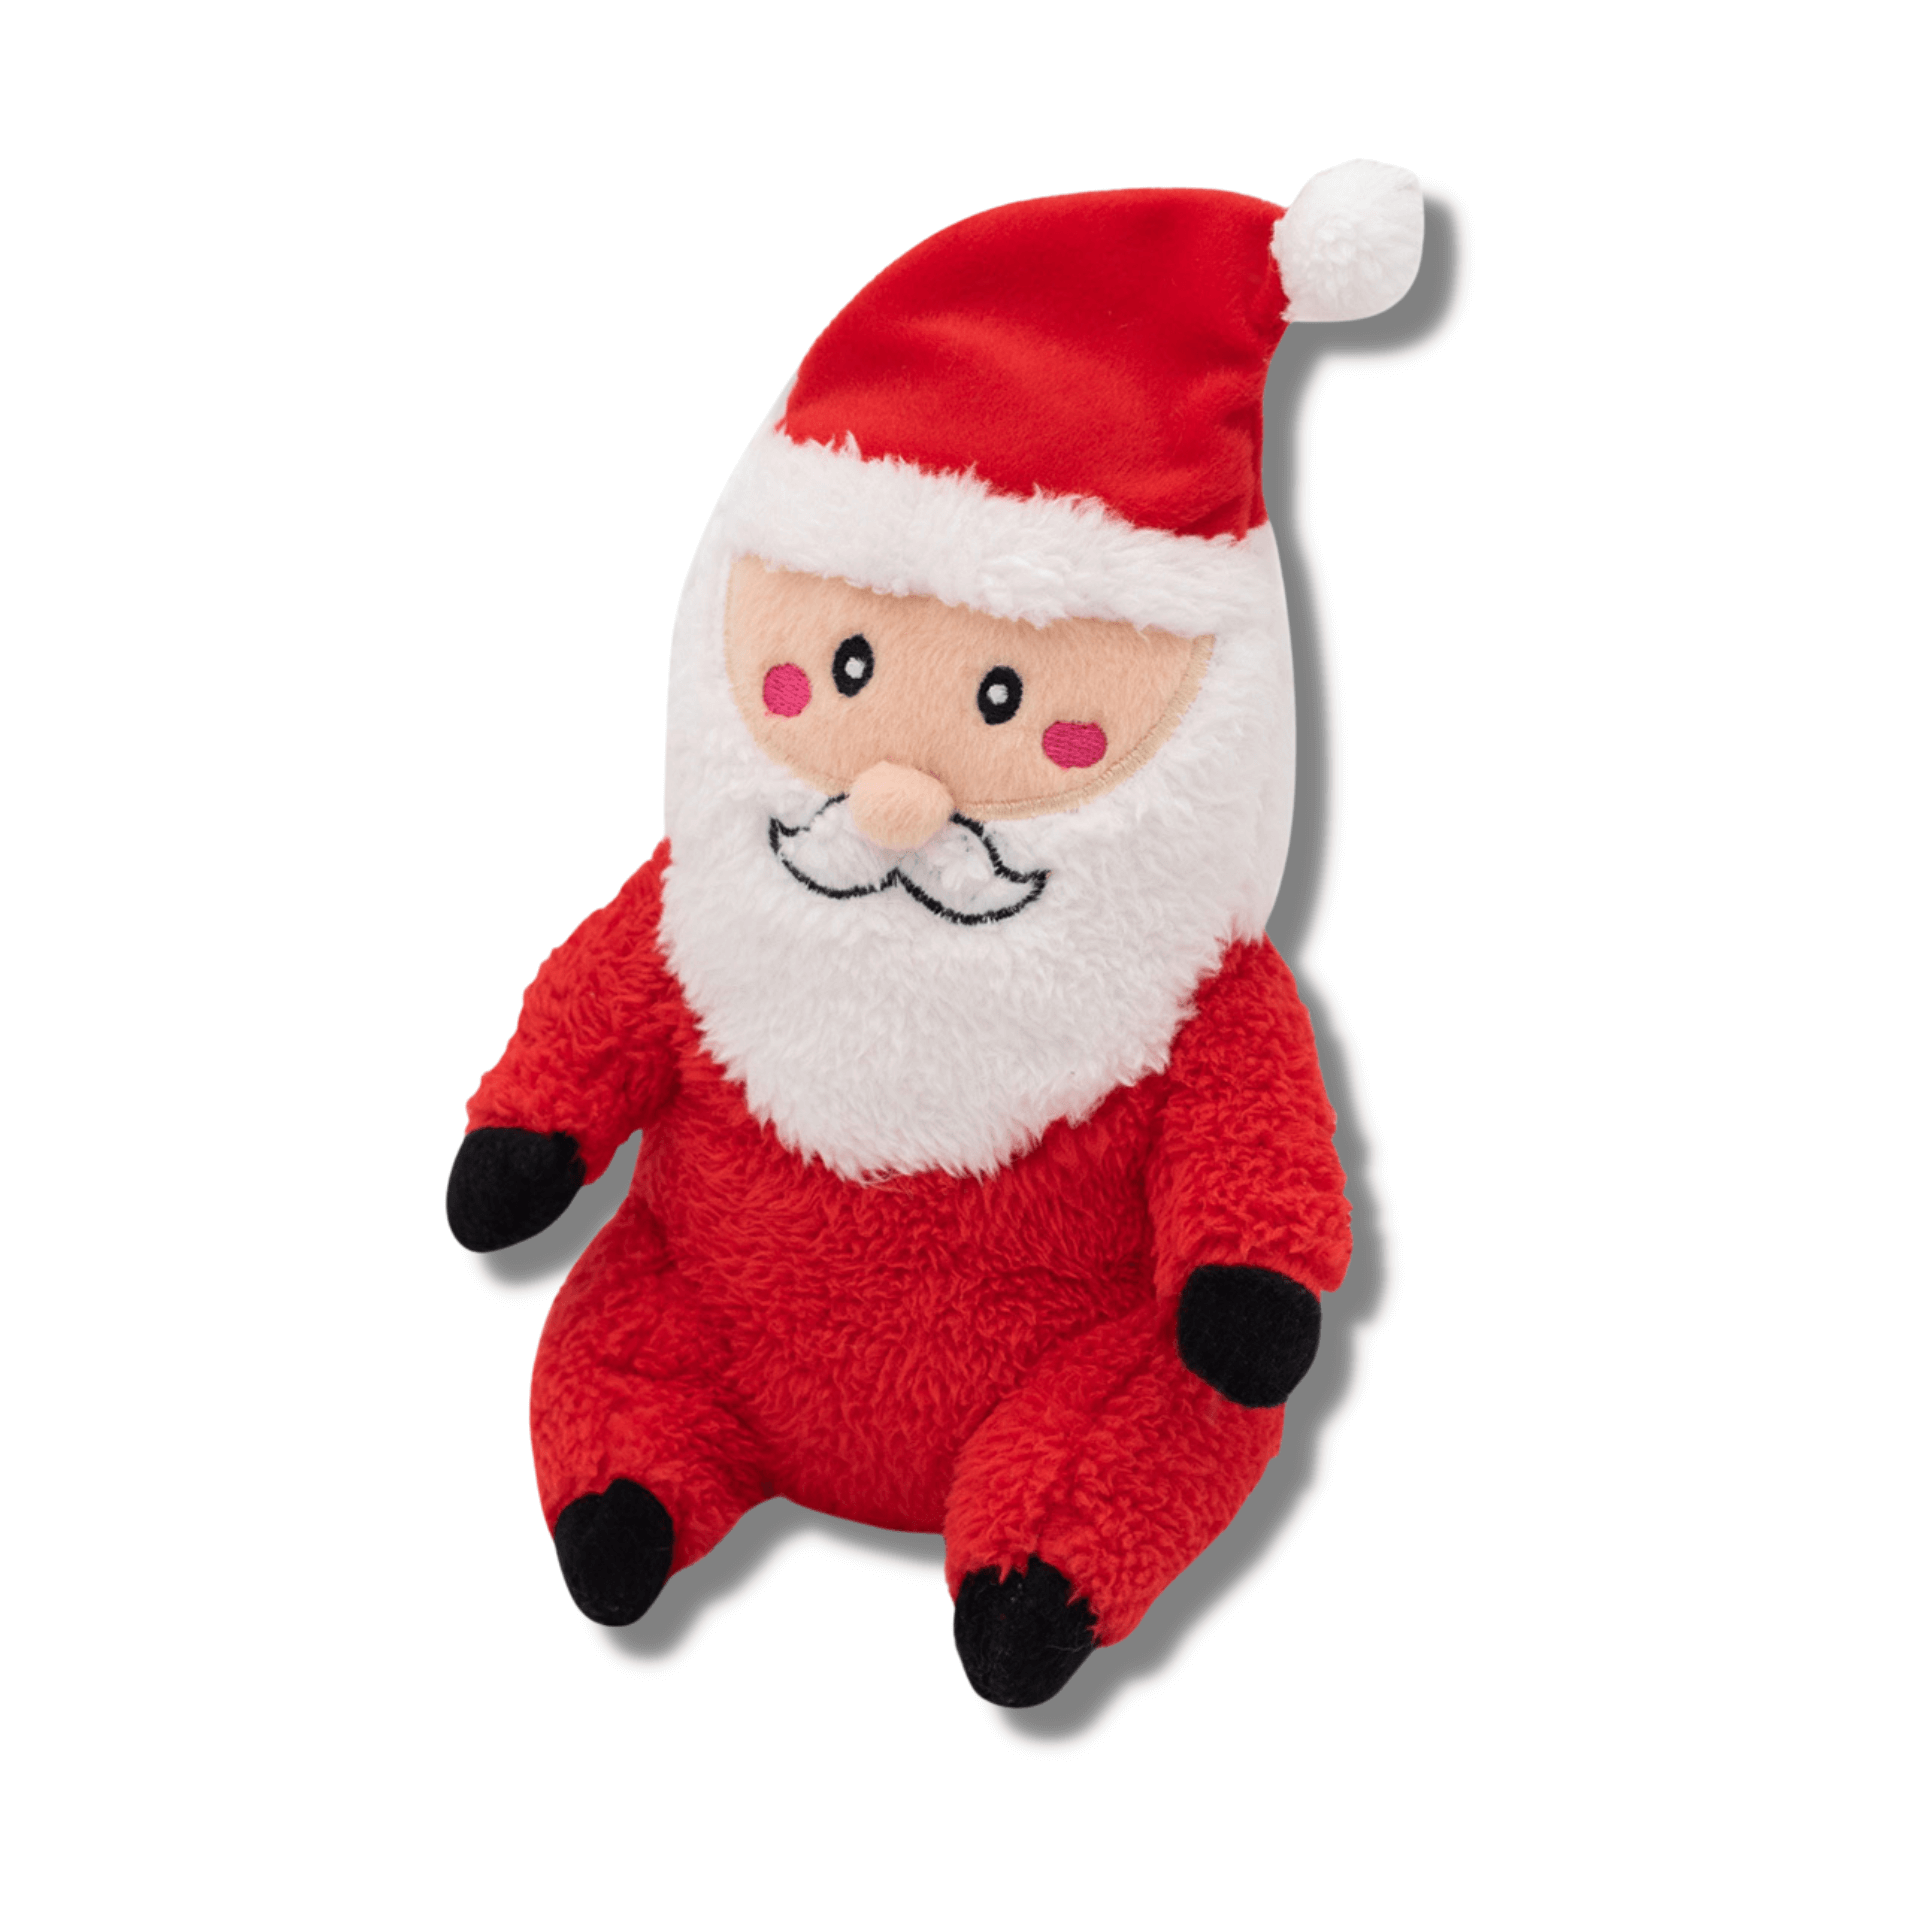 Christmas themed Santa plush dog toy with squeaker